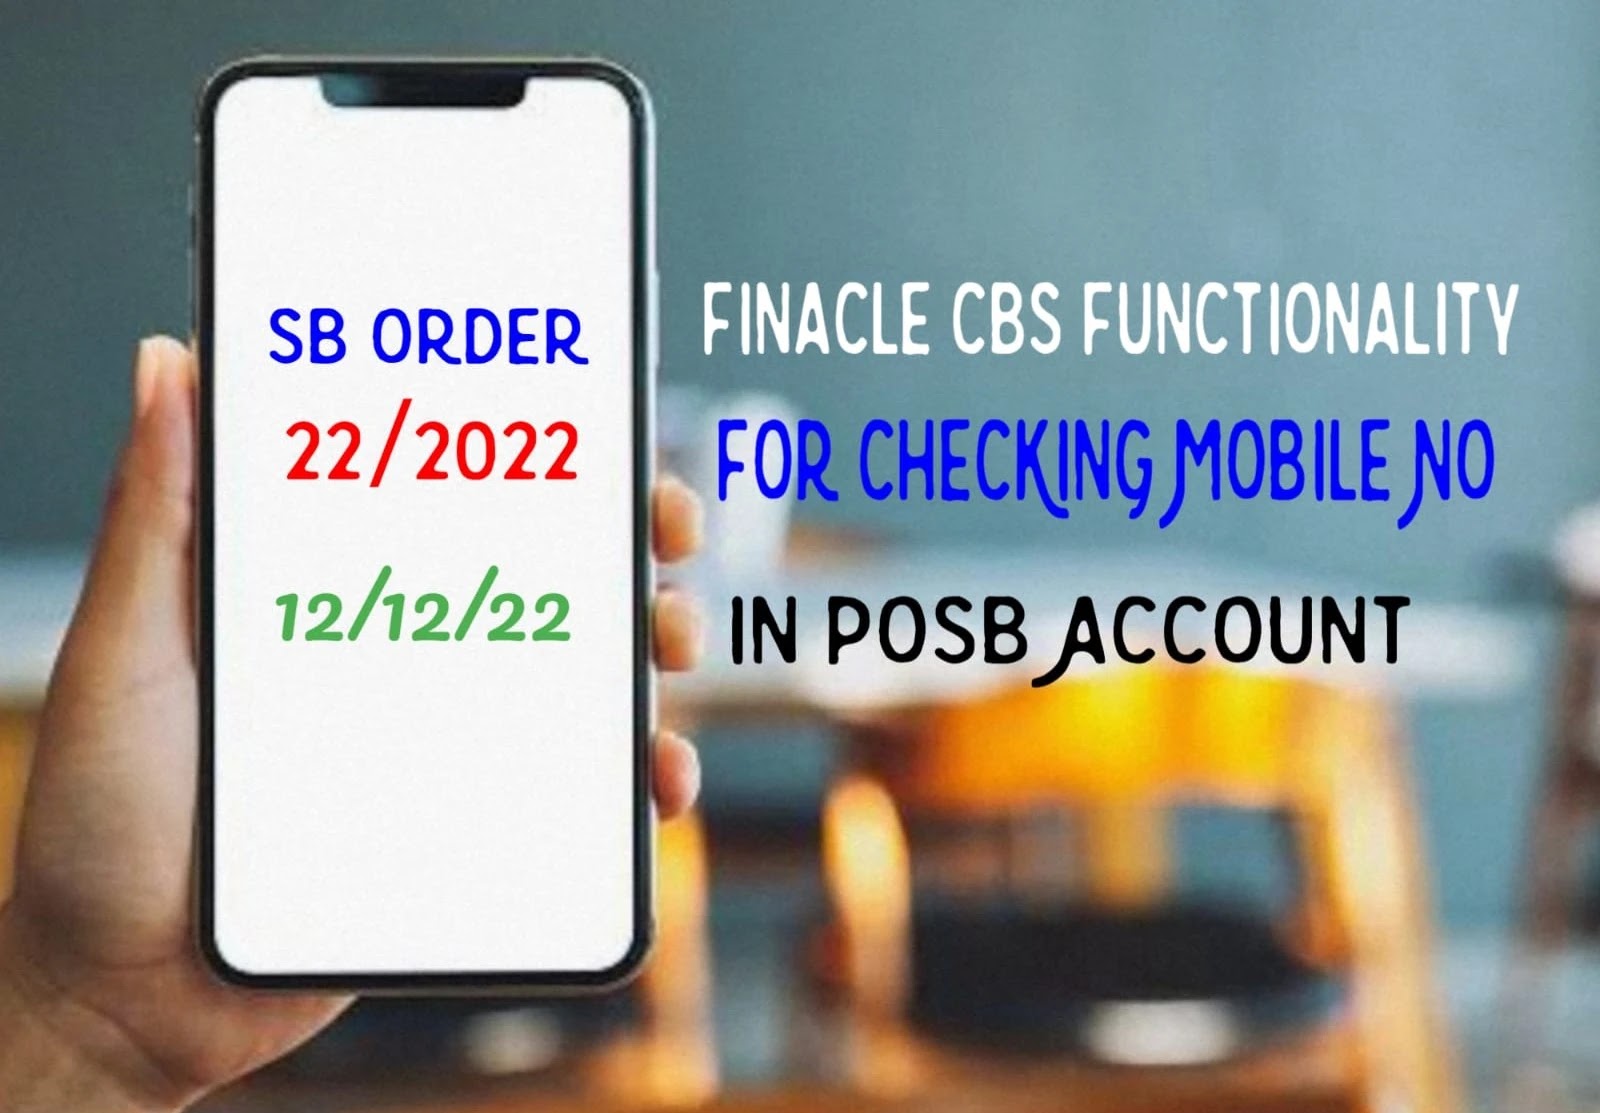 Deployment of functionality patches in Finacle CBS for checking availability of Mobile Number: DOP